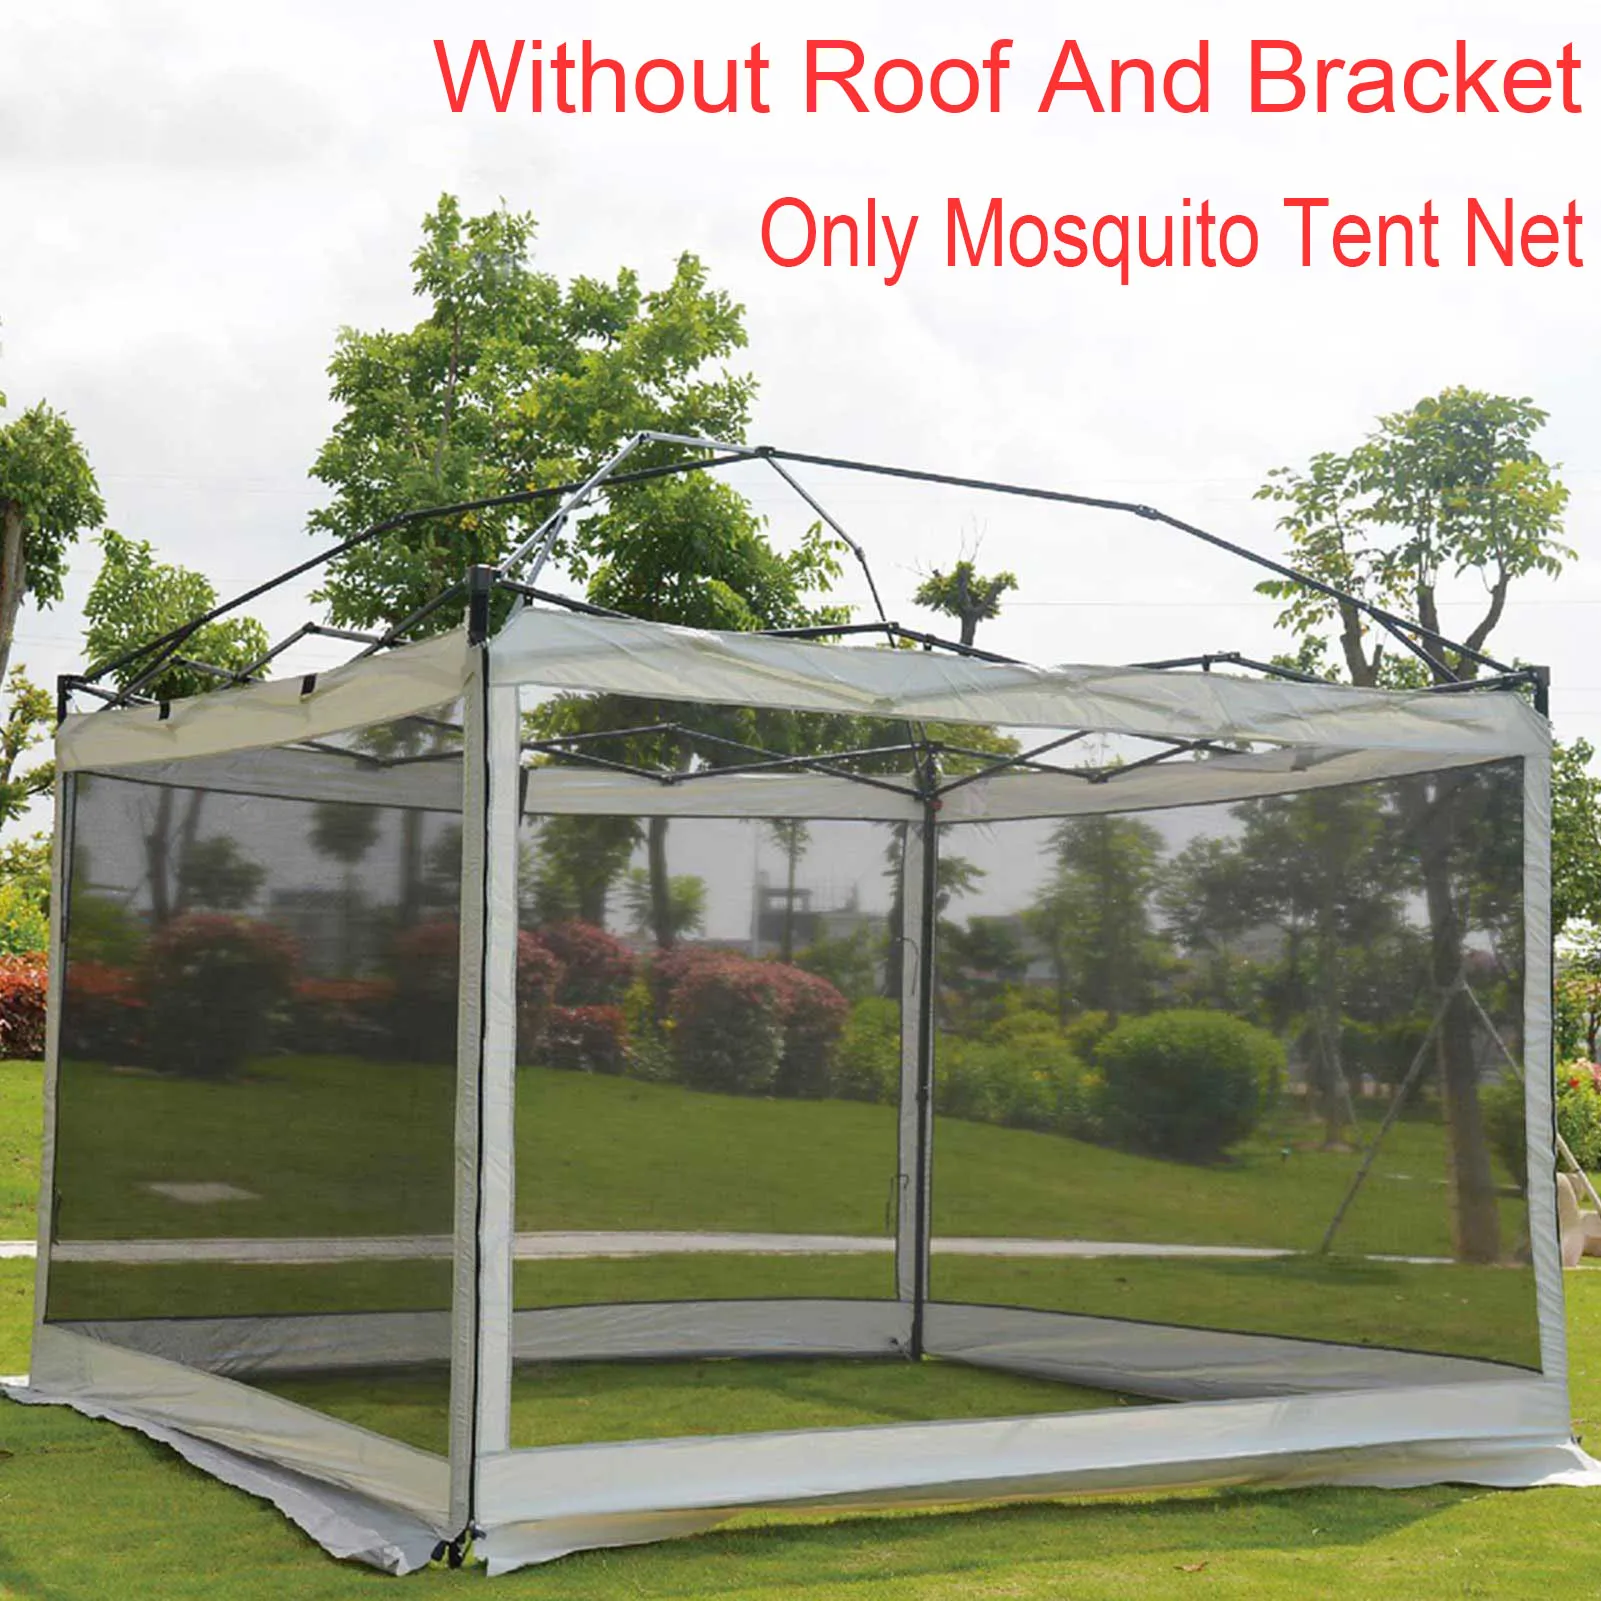 Camping Mosquito Tent Net Portable Folding Mesh 300D Outdoor Mosquito Repellent Sunshade Mesh For Camping Accessories